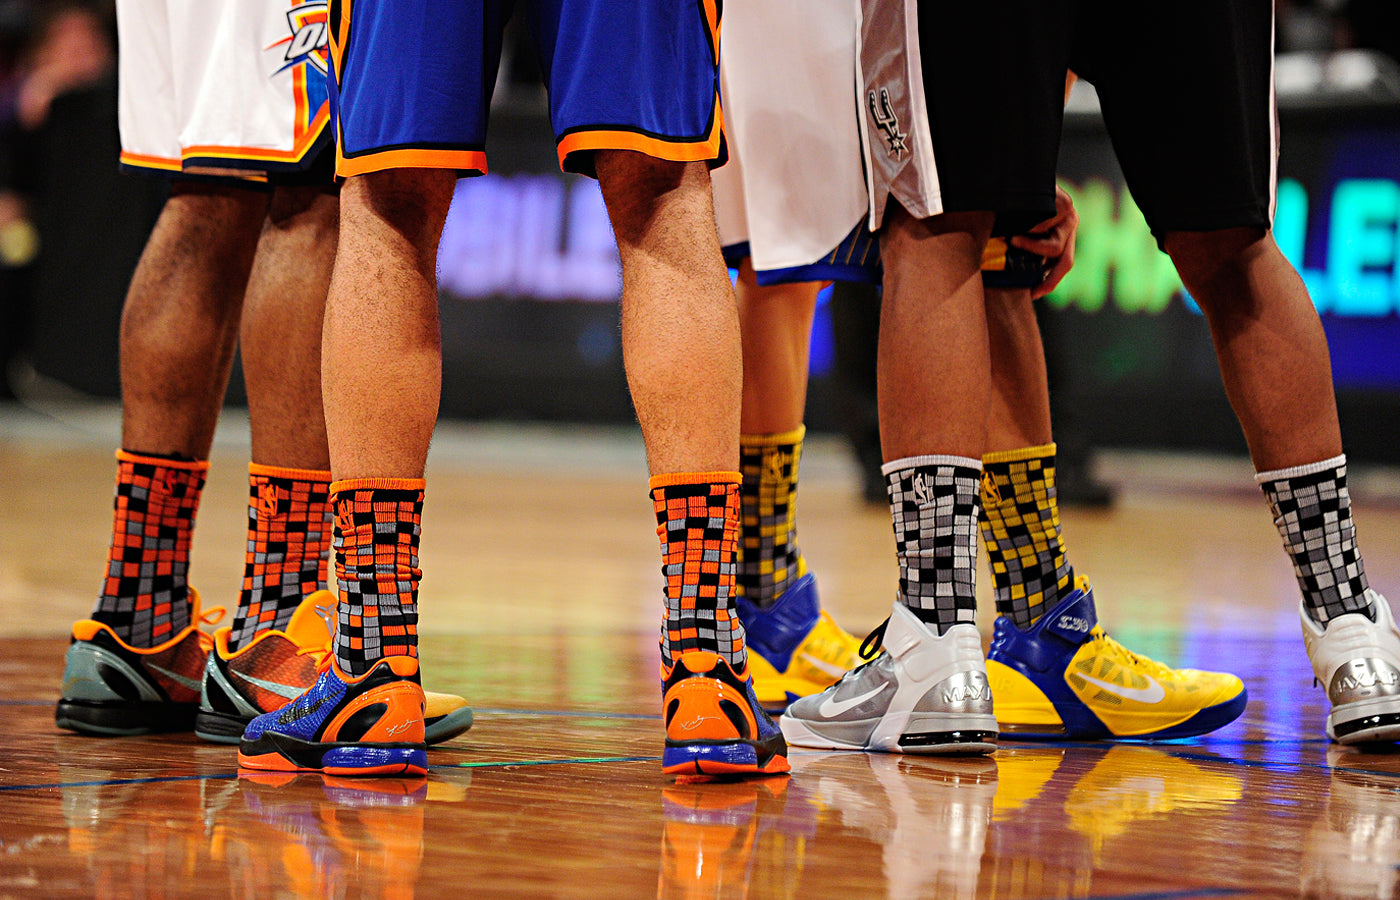 Do NBA Players Wear Compression Gear For Their Game Or Style?